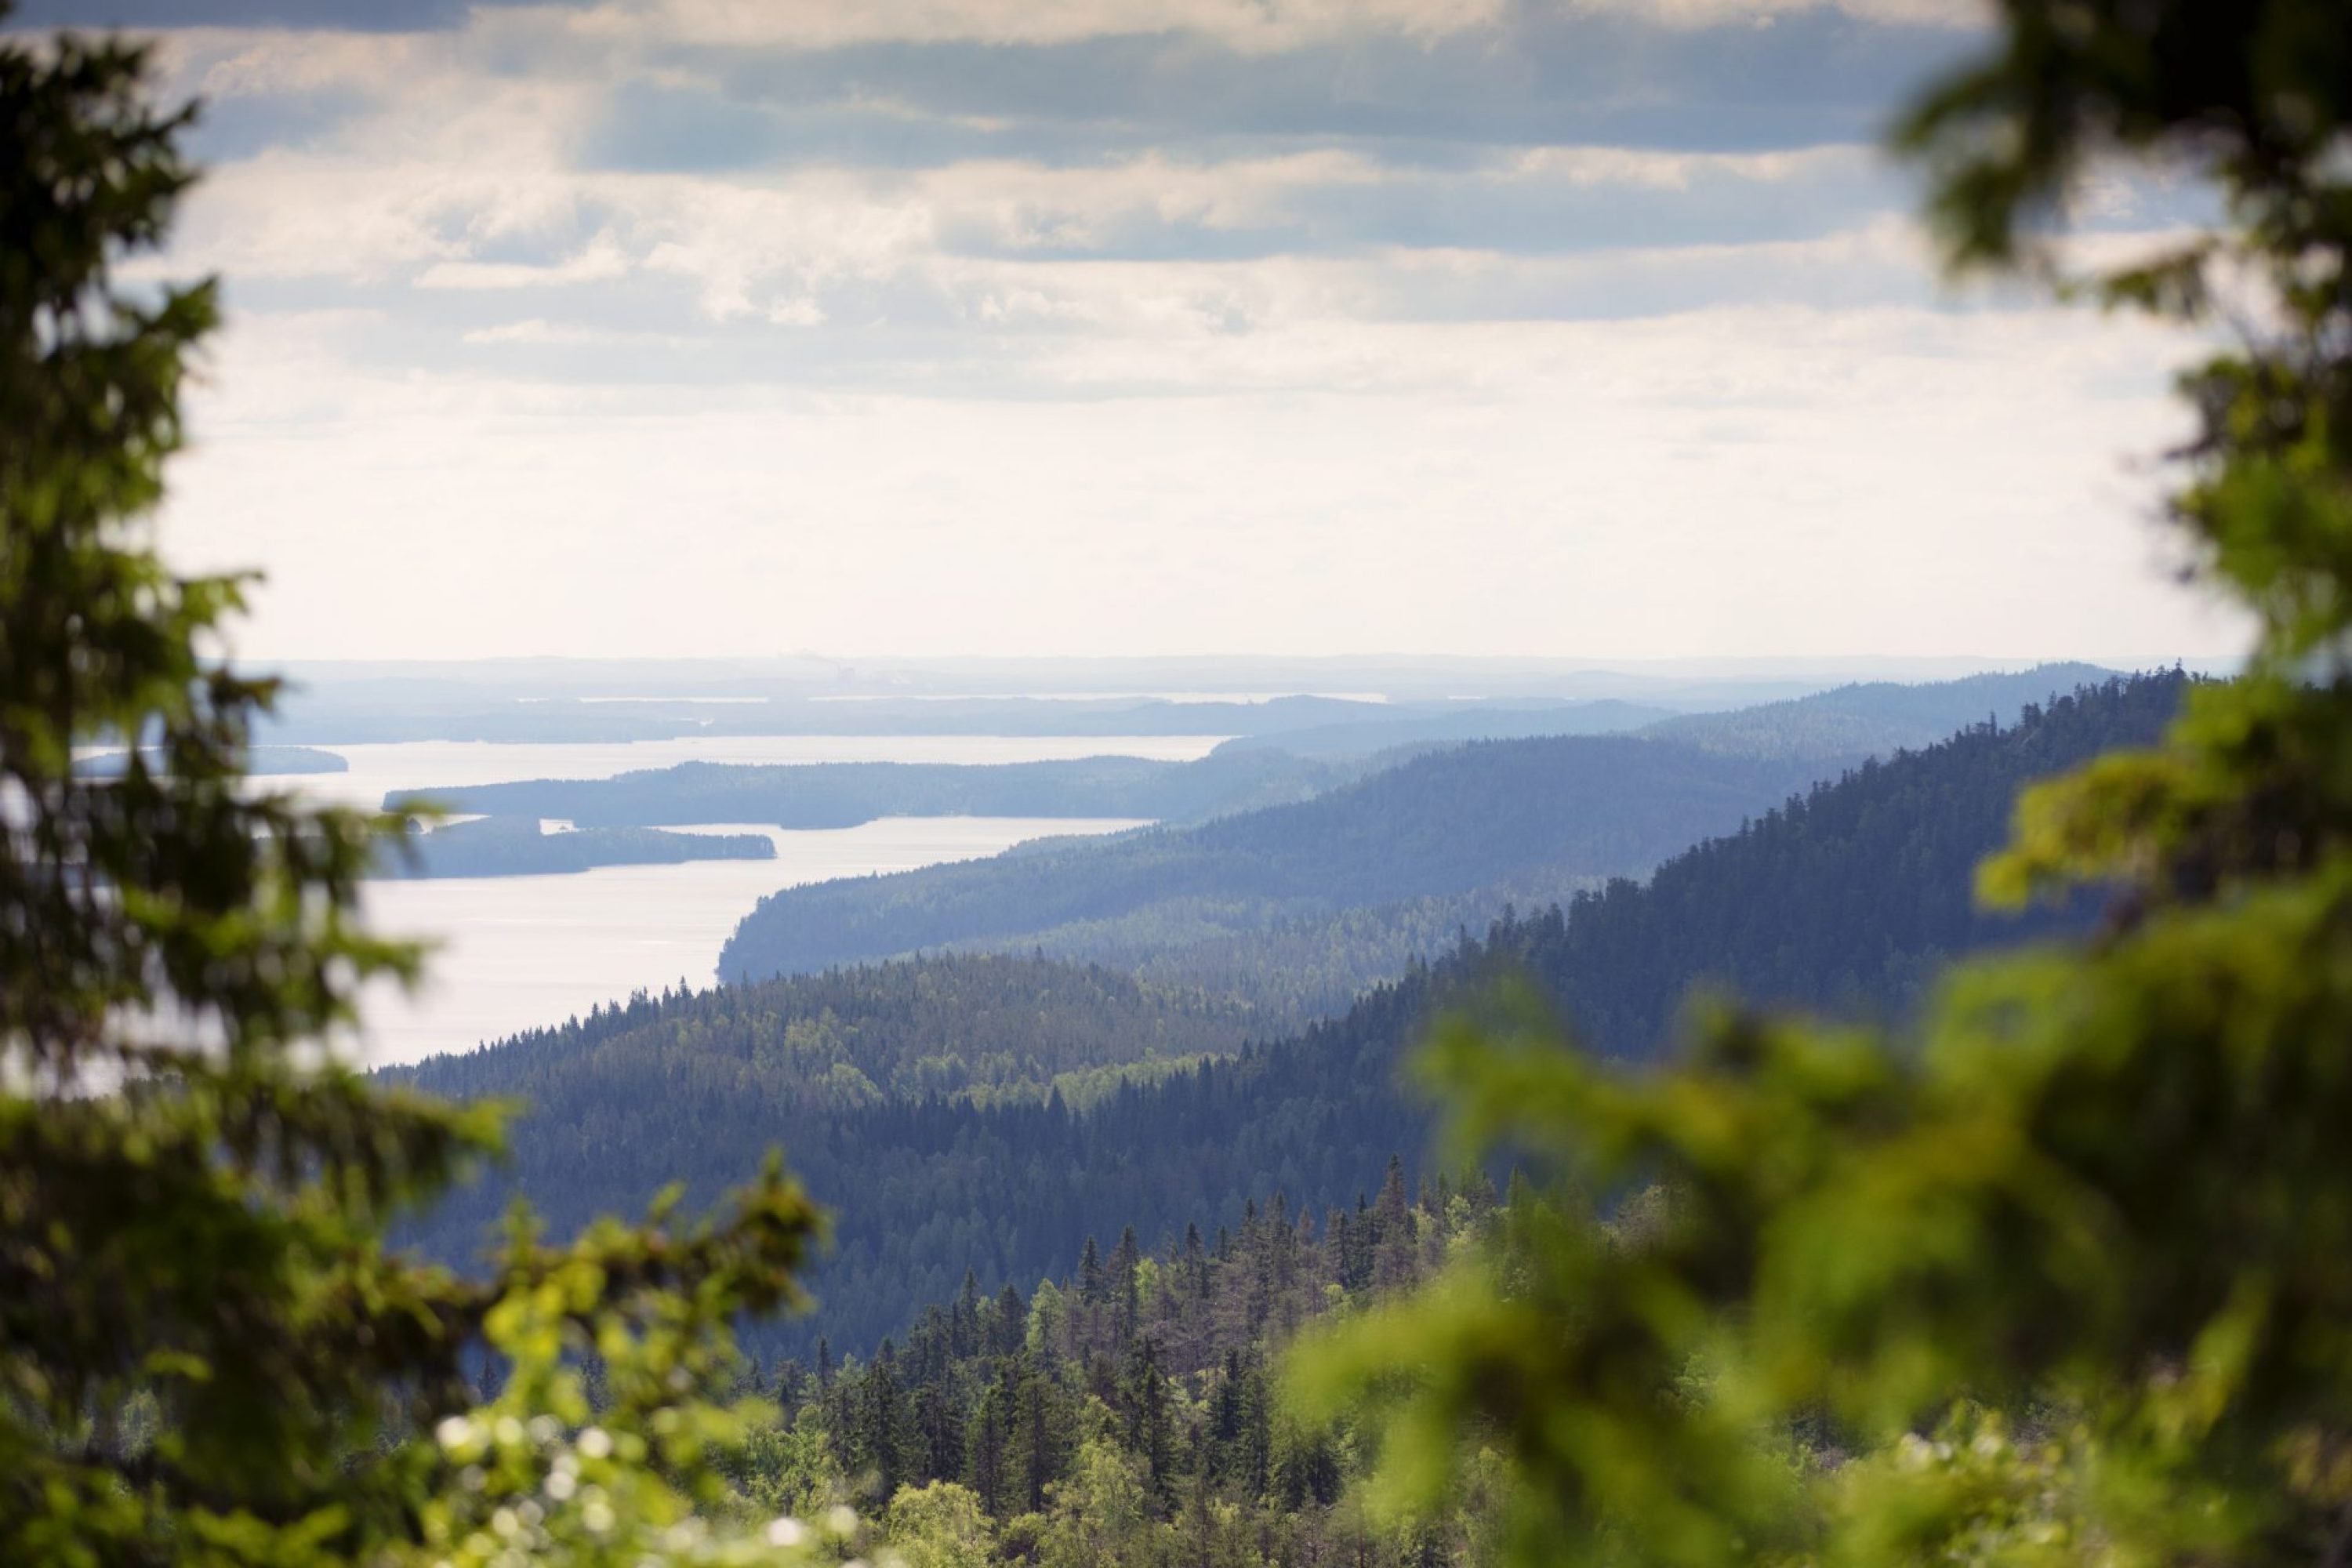 A view over the Koli National Park to Lake Pielinen